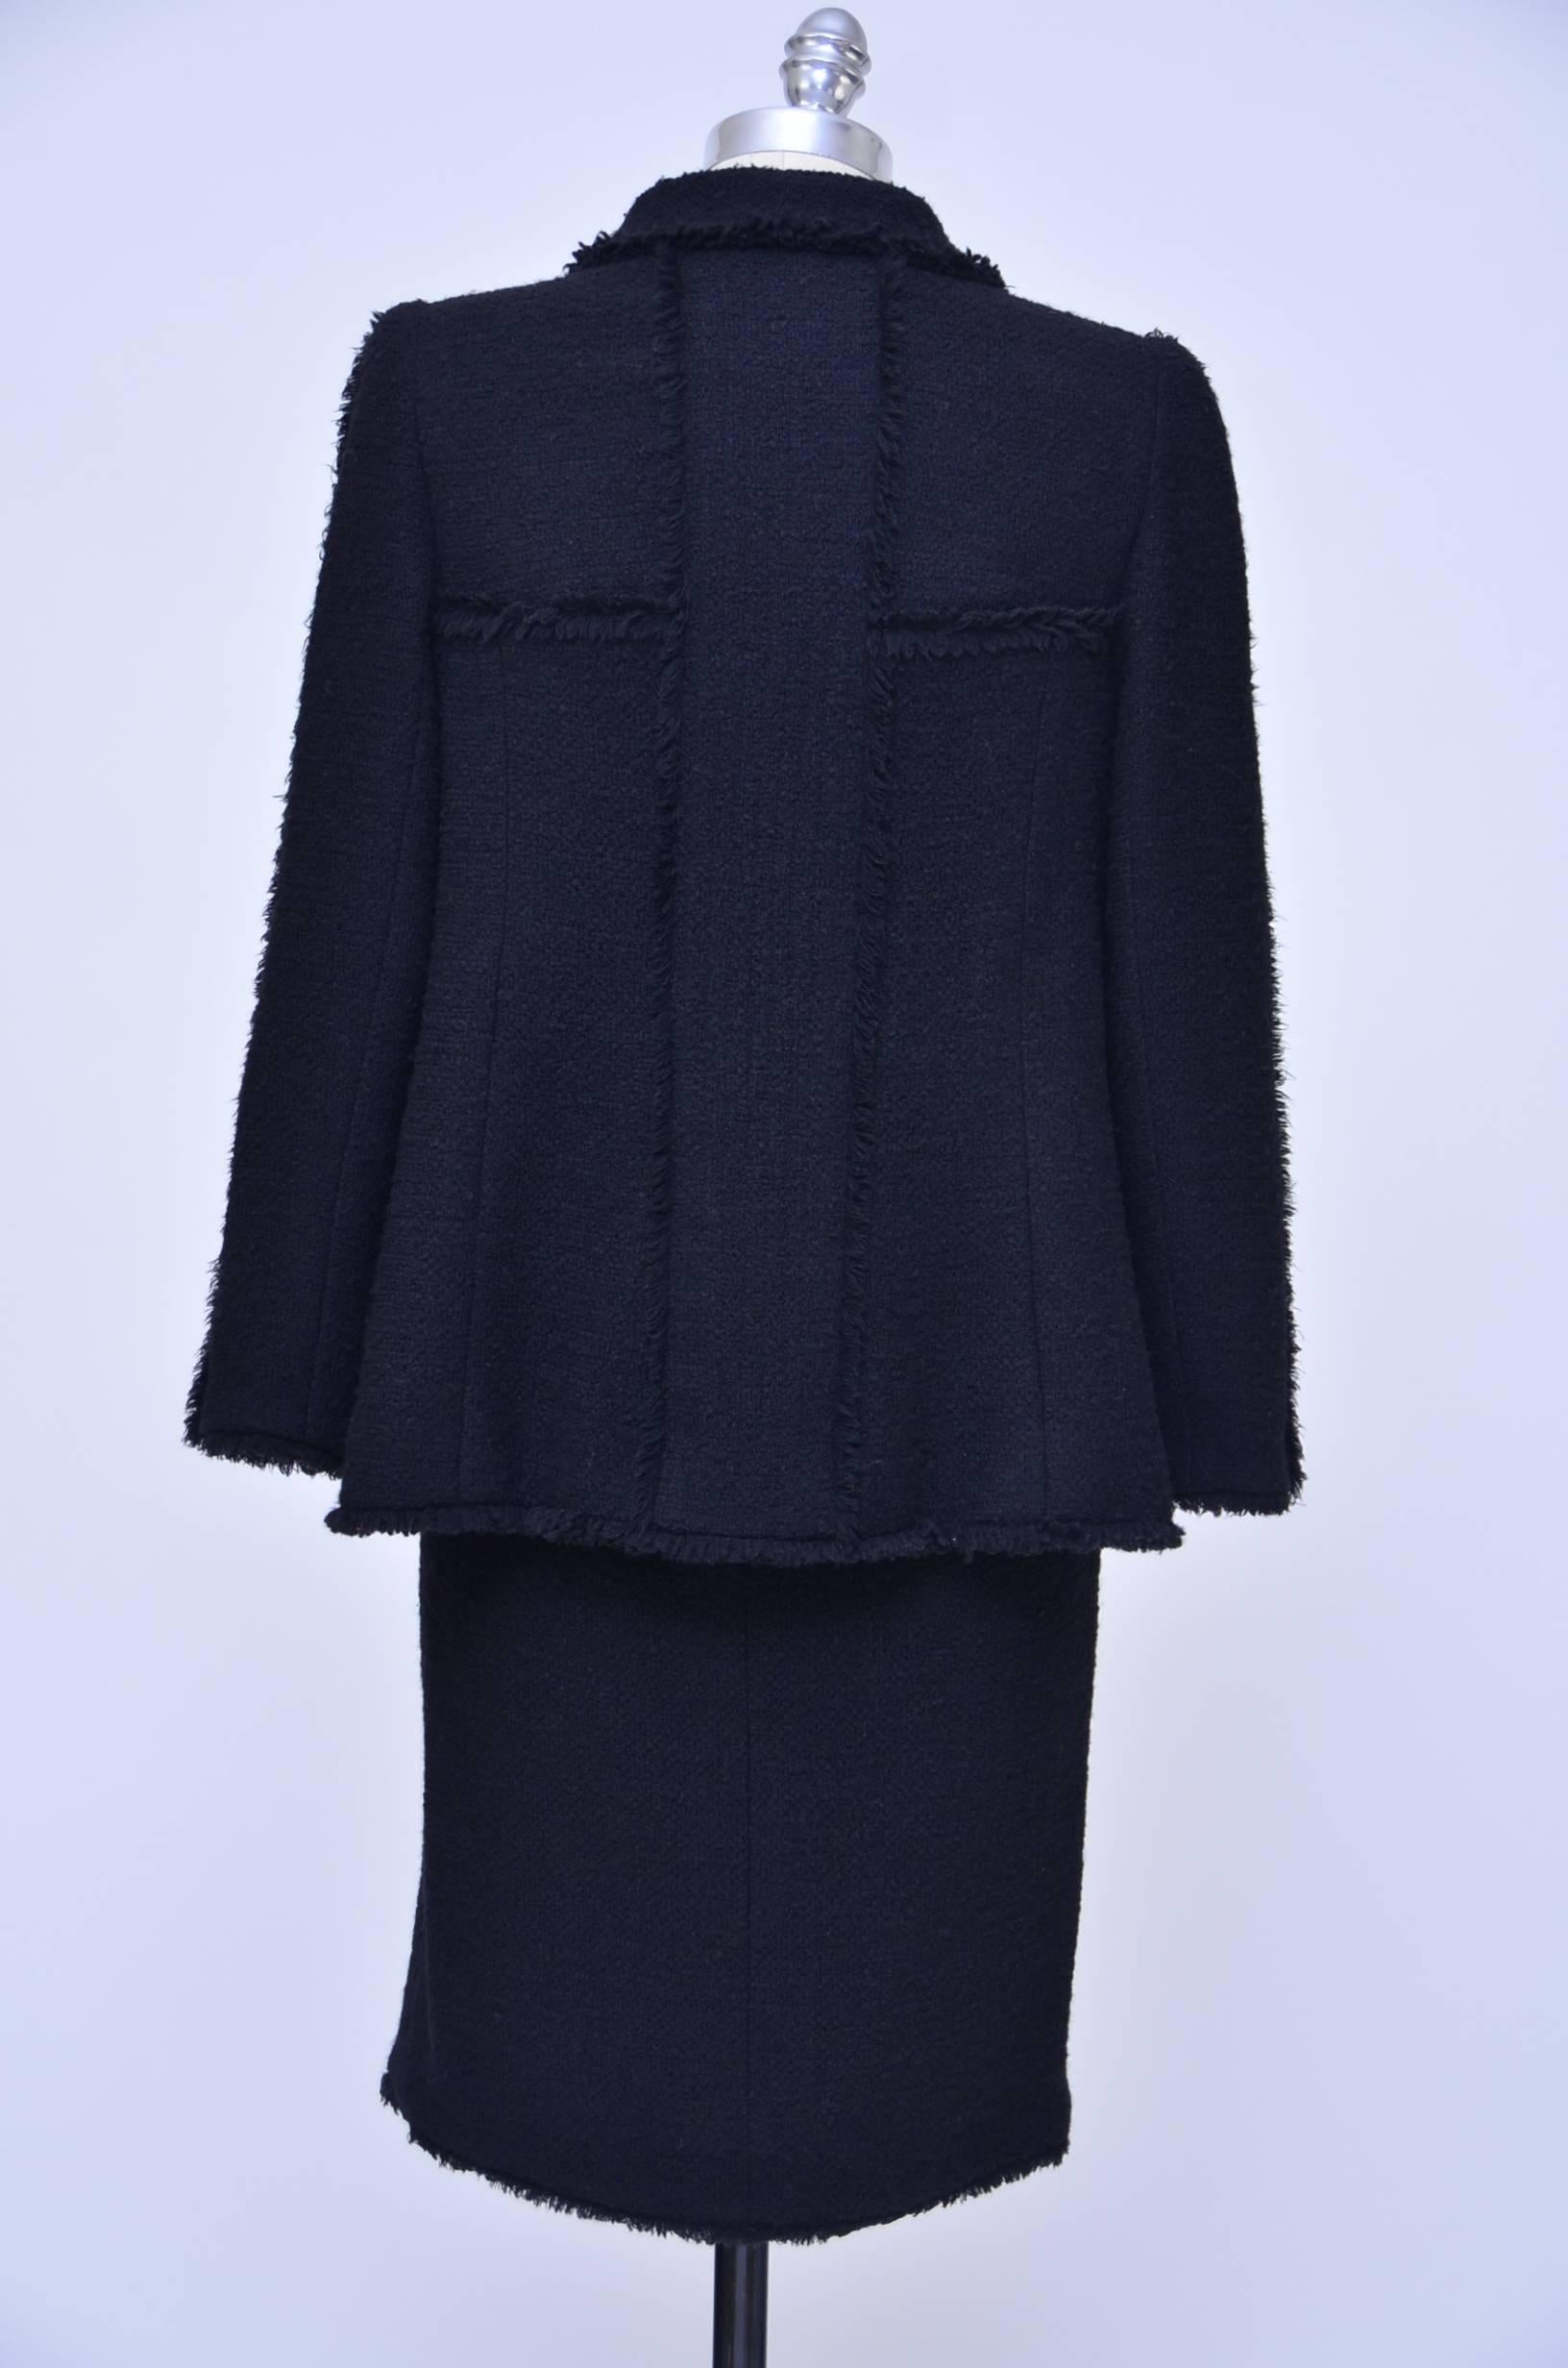 Chanel Haute Couture black tweed suit.
Jacket and skirt in excellent mint condition.
Made of slightly softer wool fabric with 4 pockets on the front.
Approximate measurements:
Jacket...underarm 38